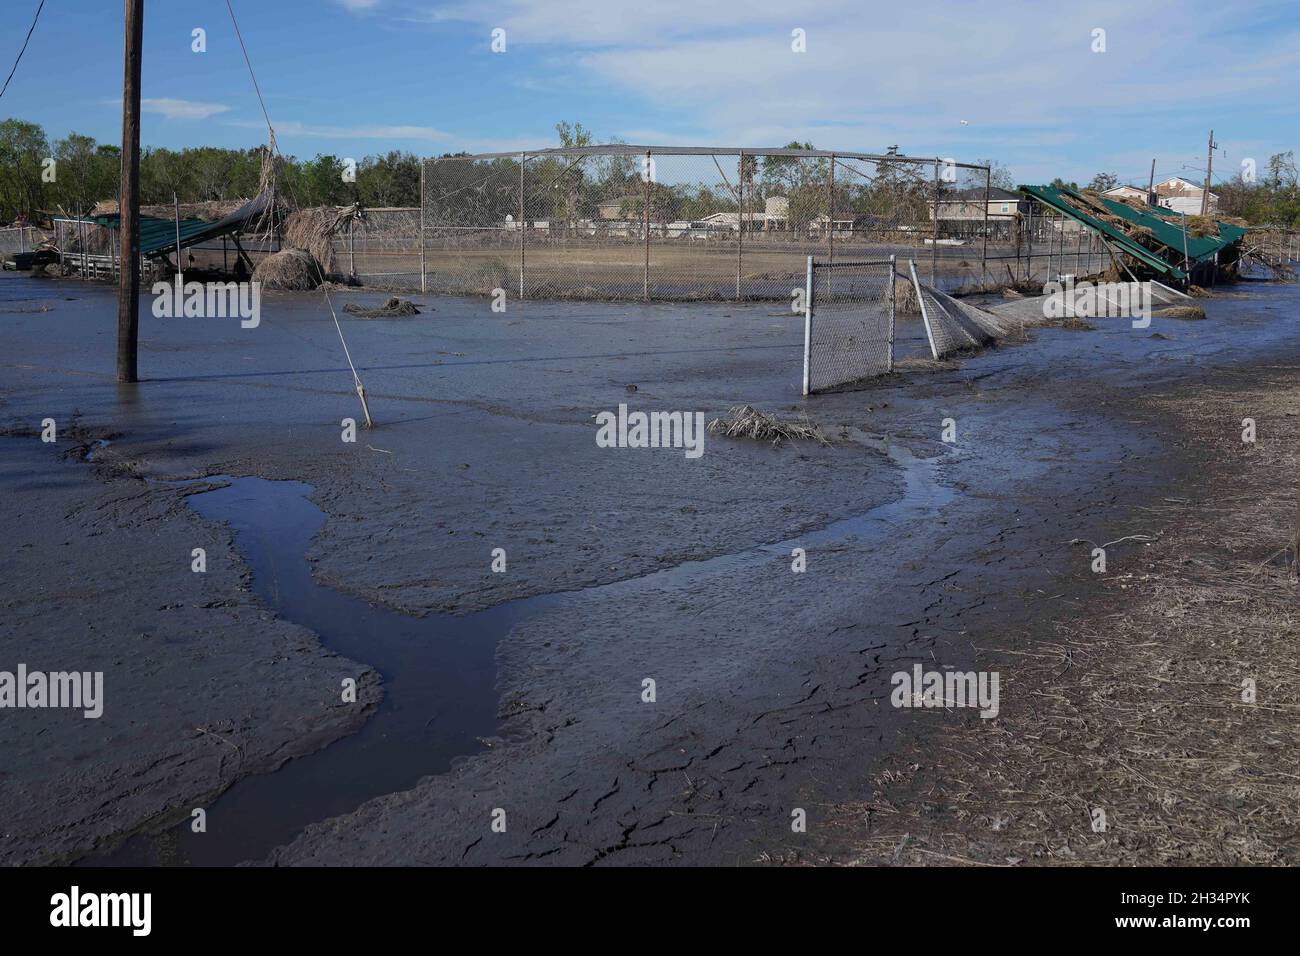 Ironton, United States of America. 24 September, 2021. Destroyed public parks and sports fields in the aftermath of Hurricane Ida September 24, 2021 in Ironton, Louisiana. Credit: Julie Joseph/FEMA/Alamy Live News Stock Photo